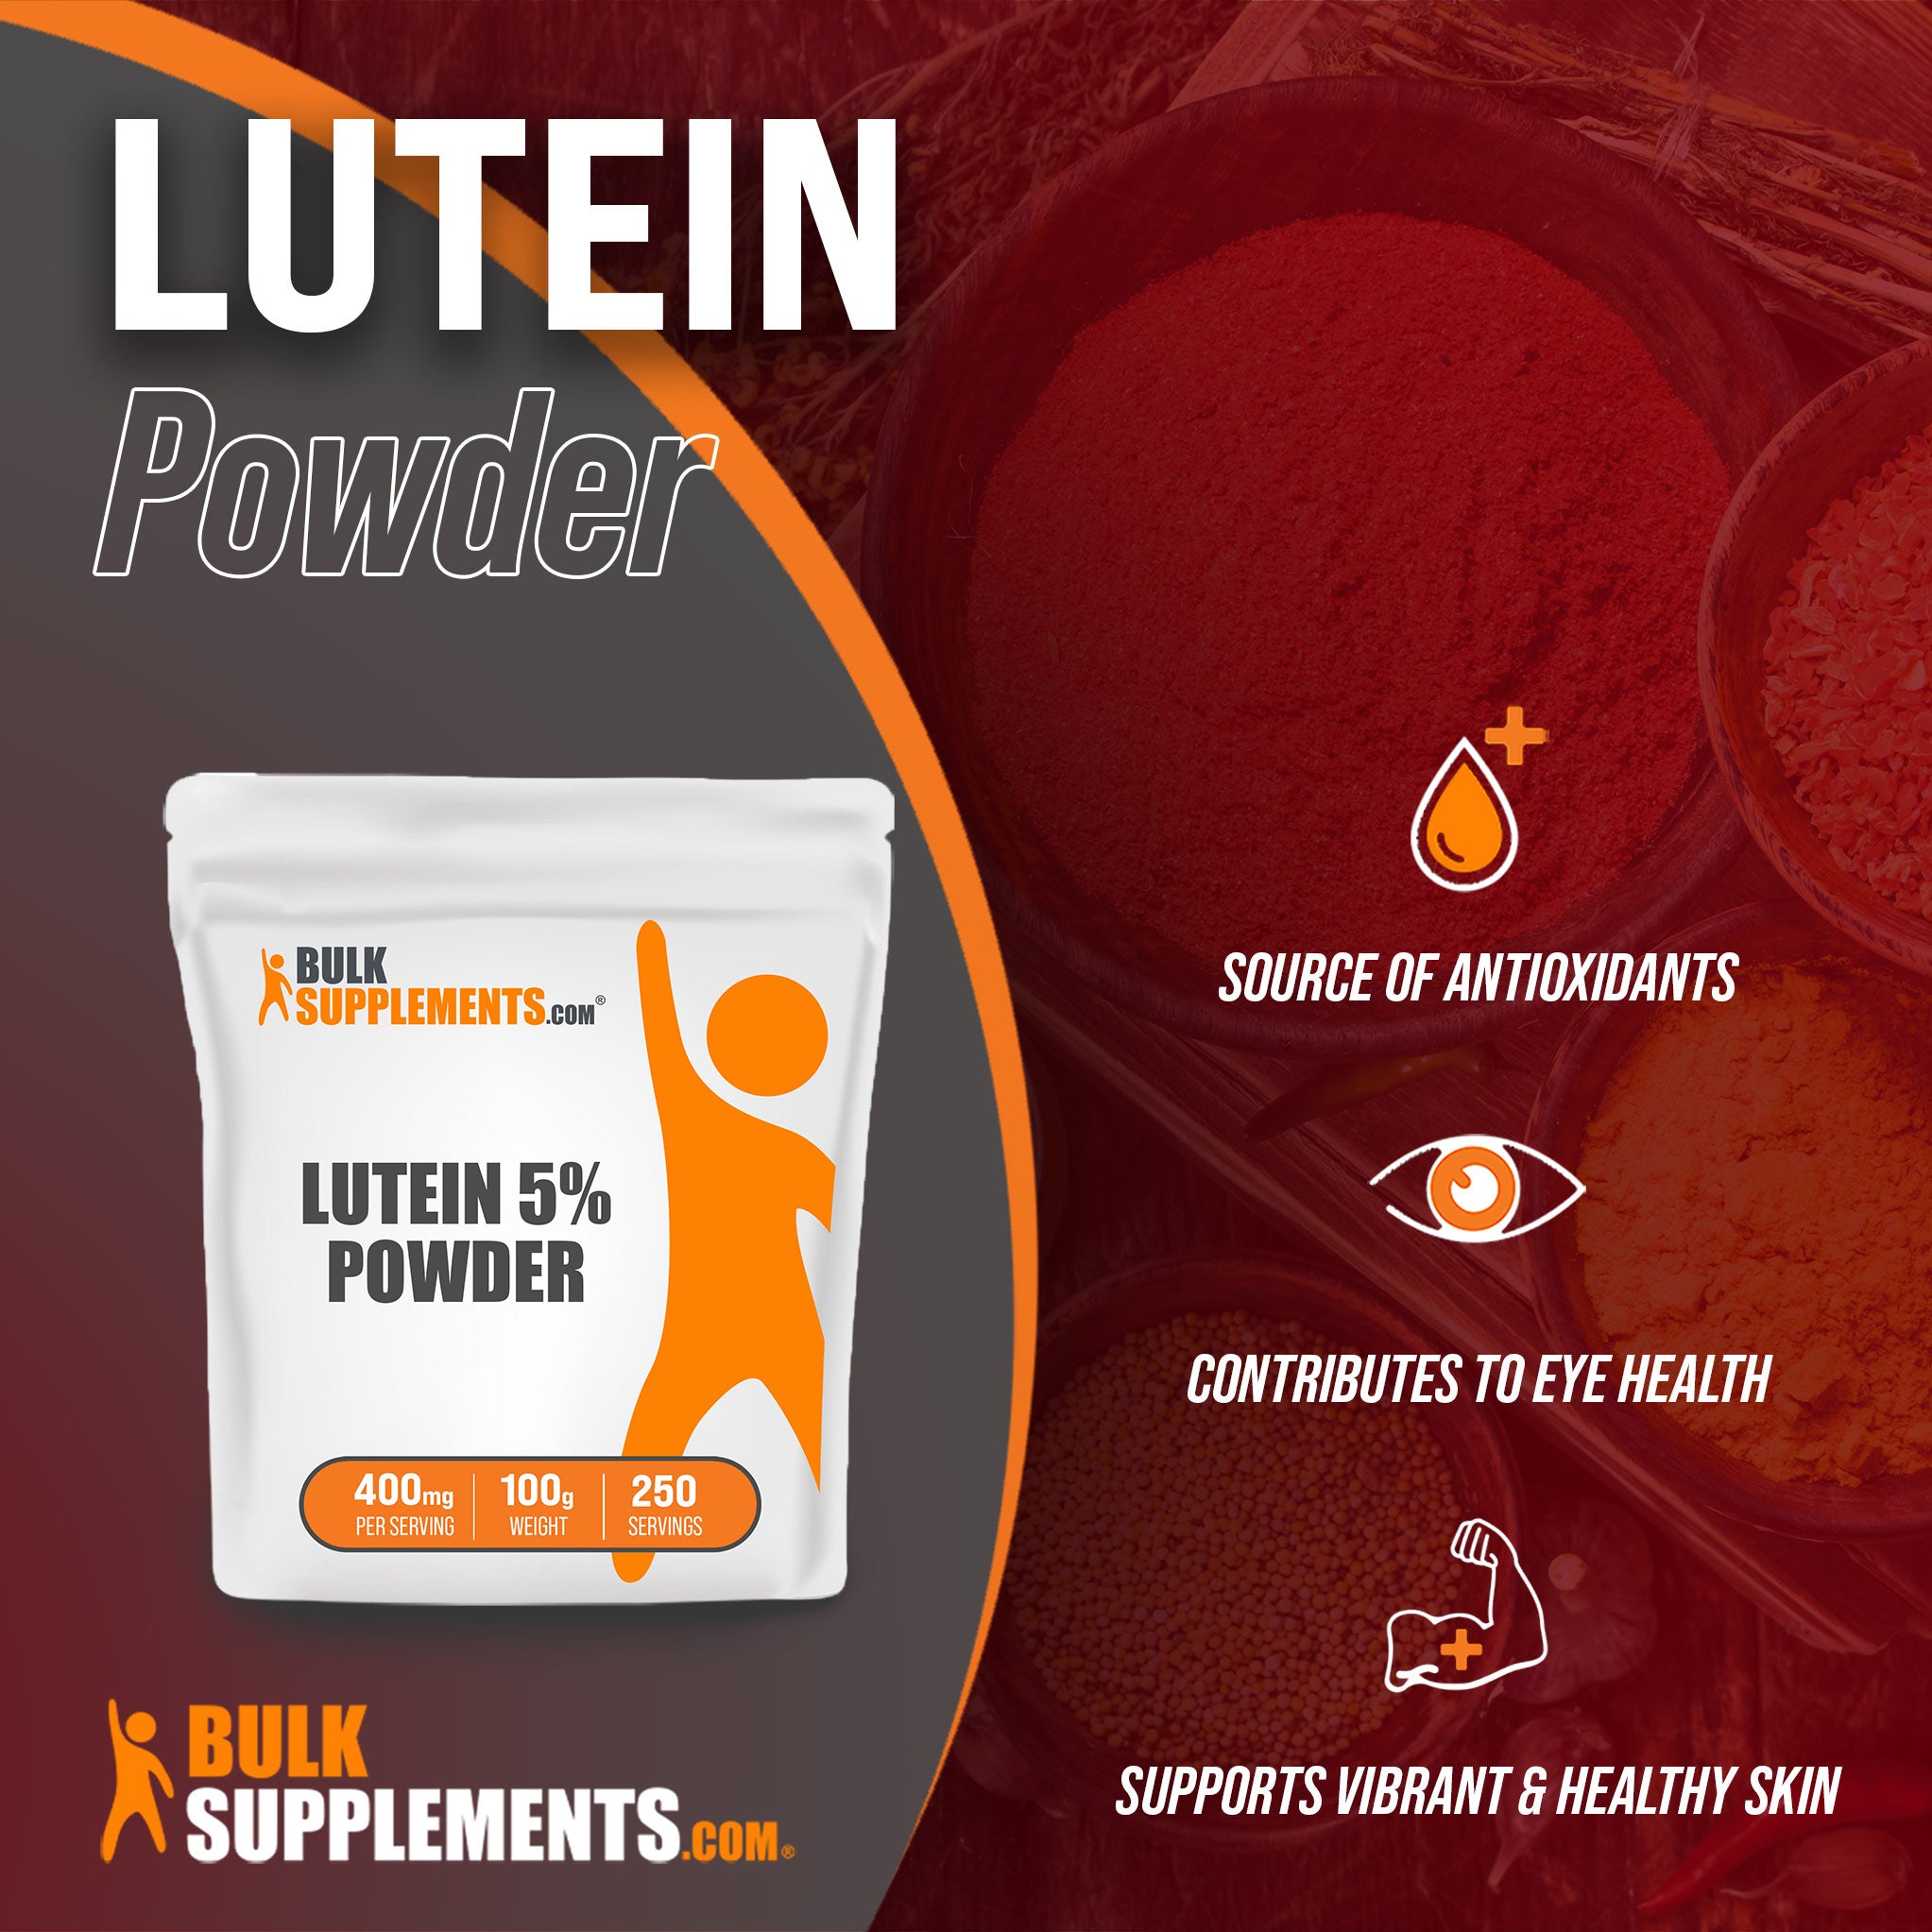 Benefits of Lutein Powder: source of antioxidants, contributes to eye health, supports vibrant and healthy skin